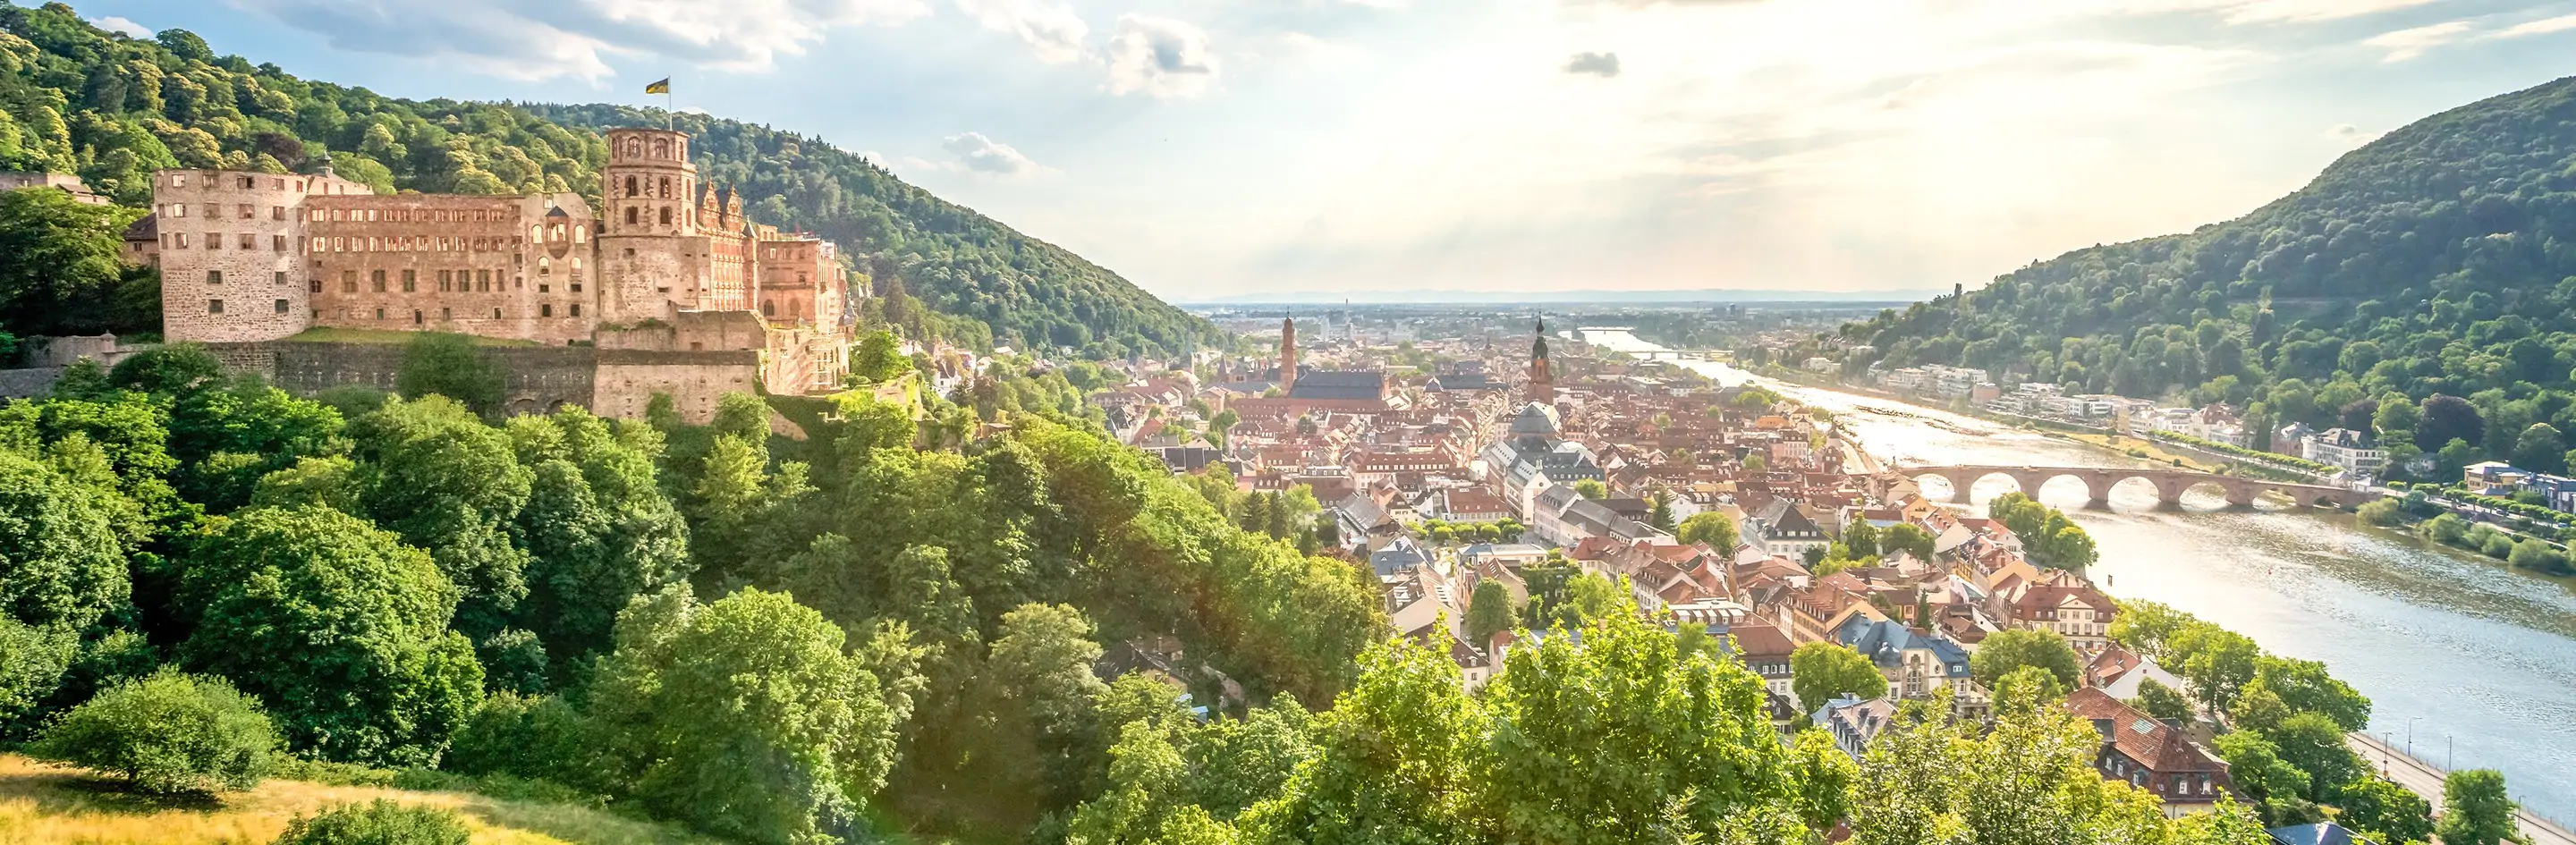 Cruise past Enchanting Castles along the Rhine River